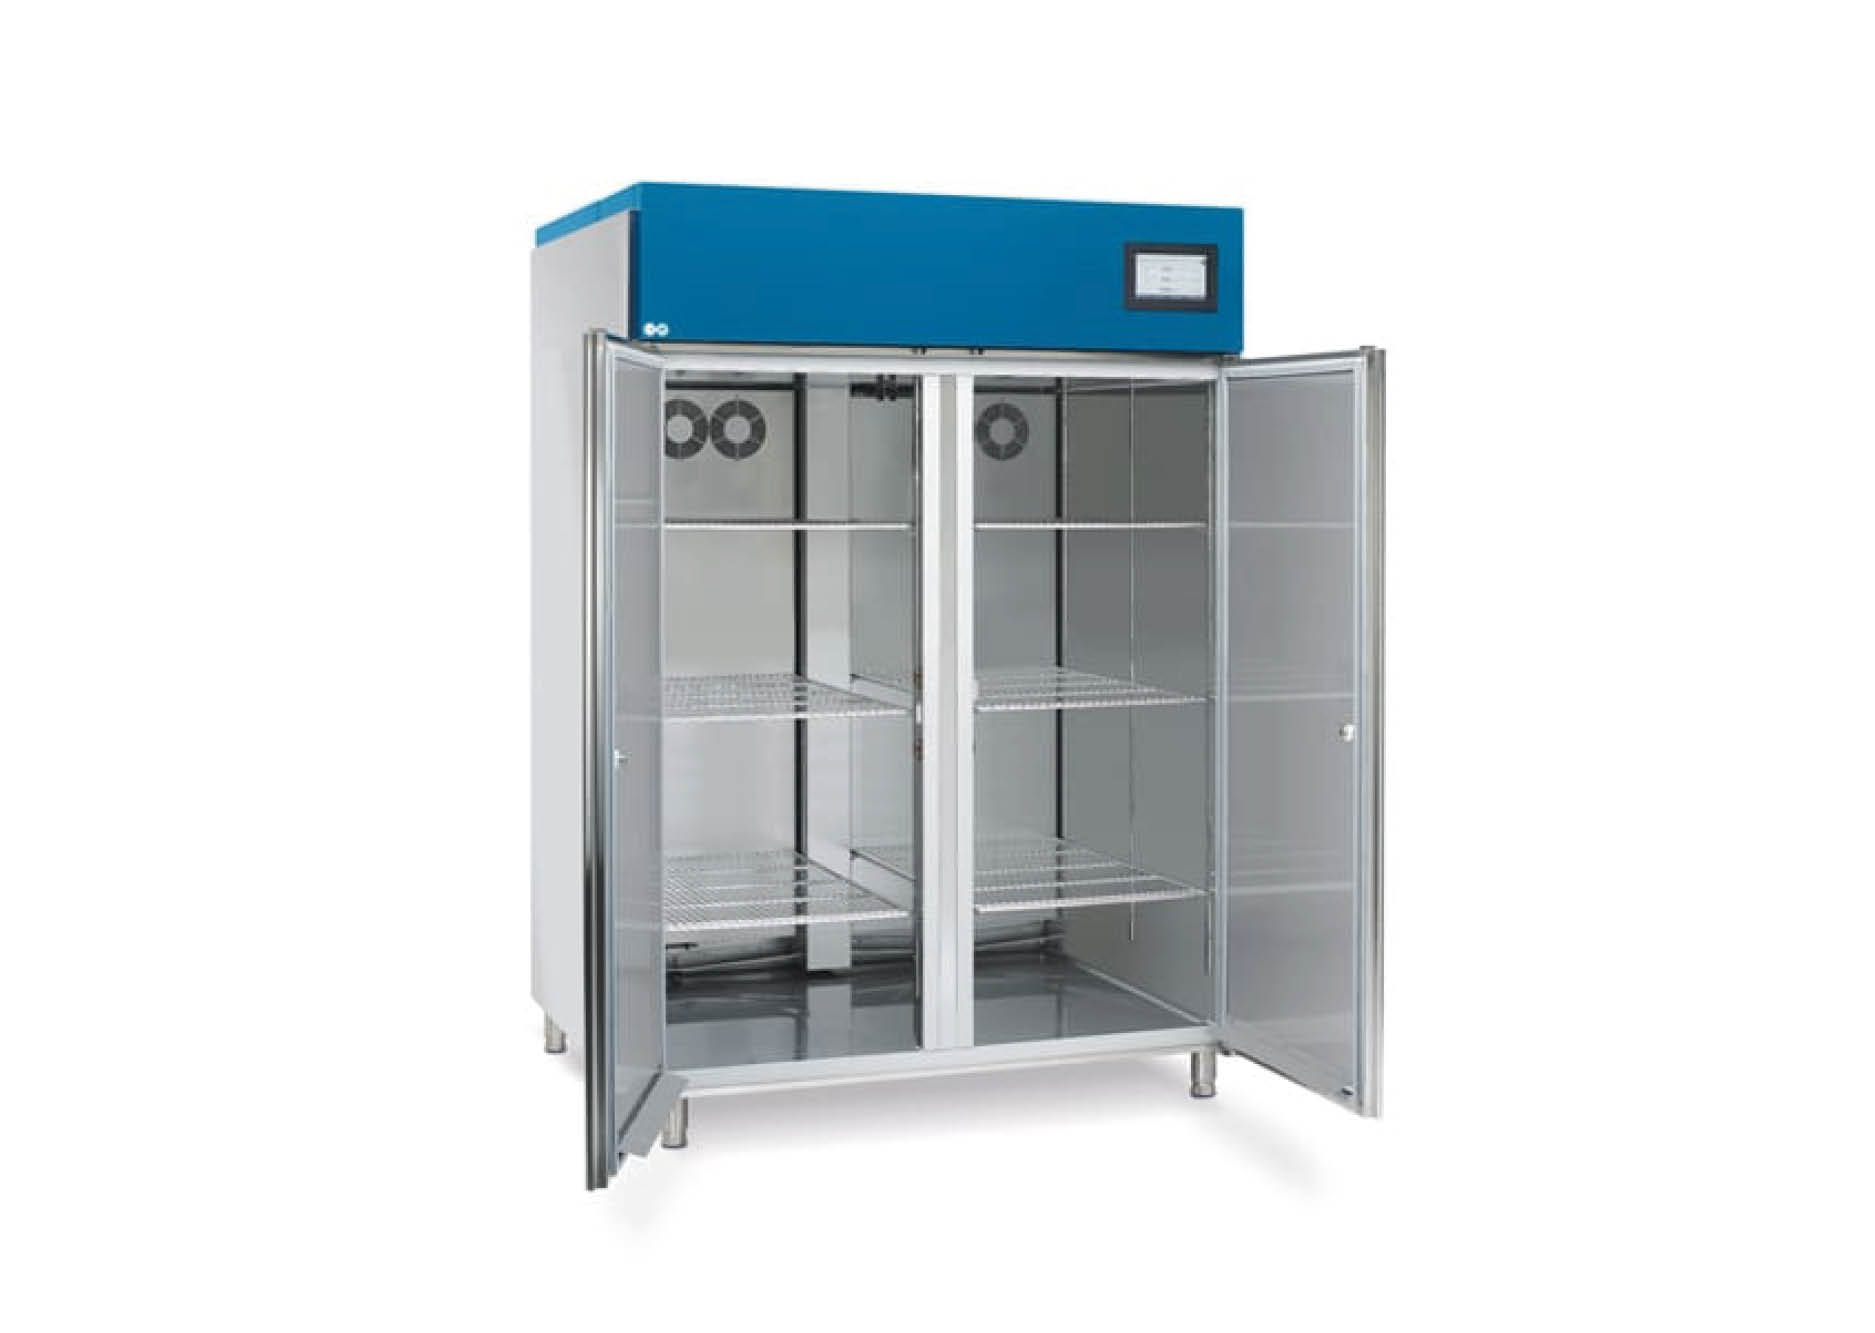 Stability Test Cabinets from Rumed